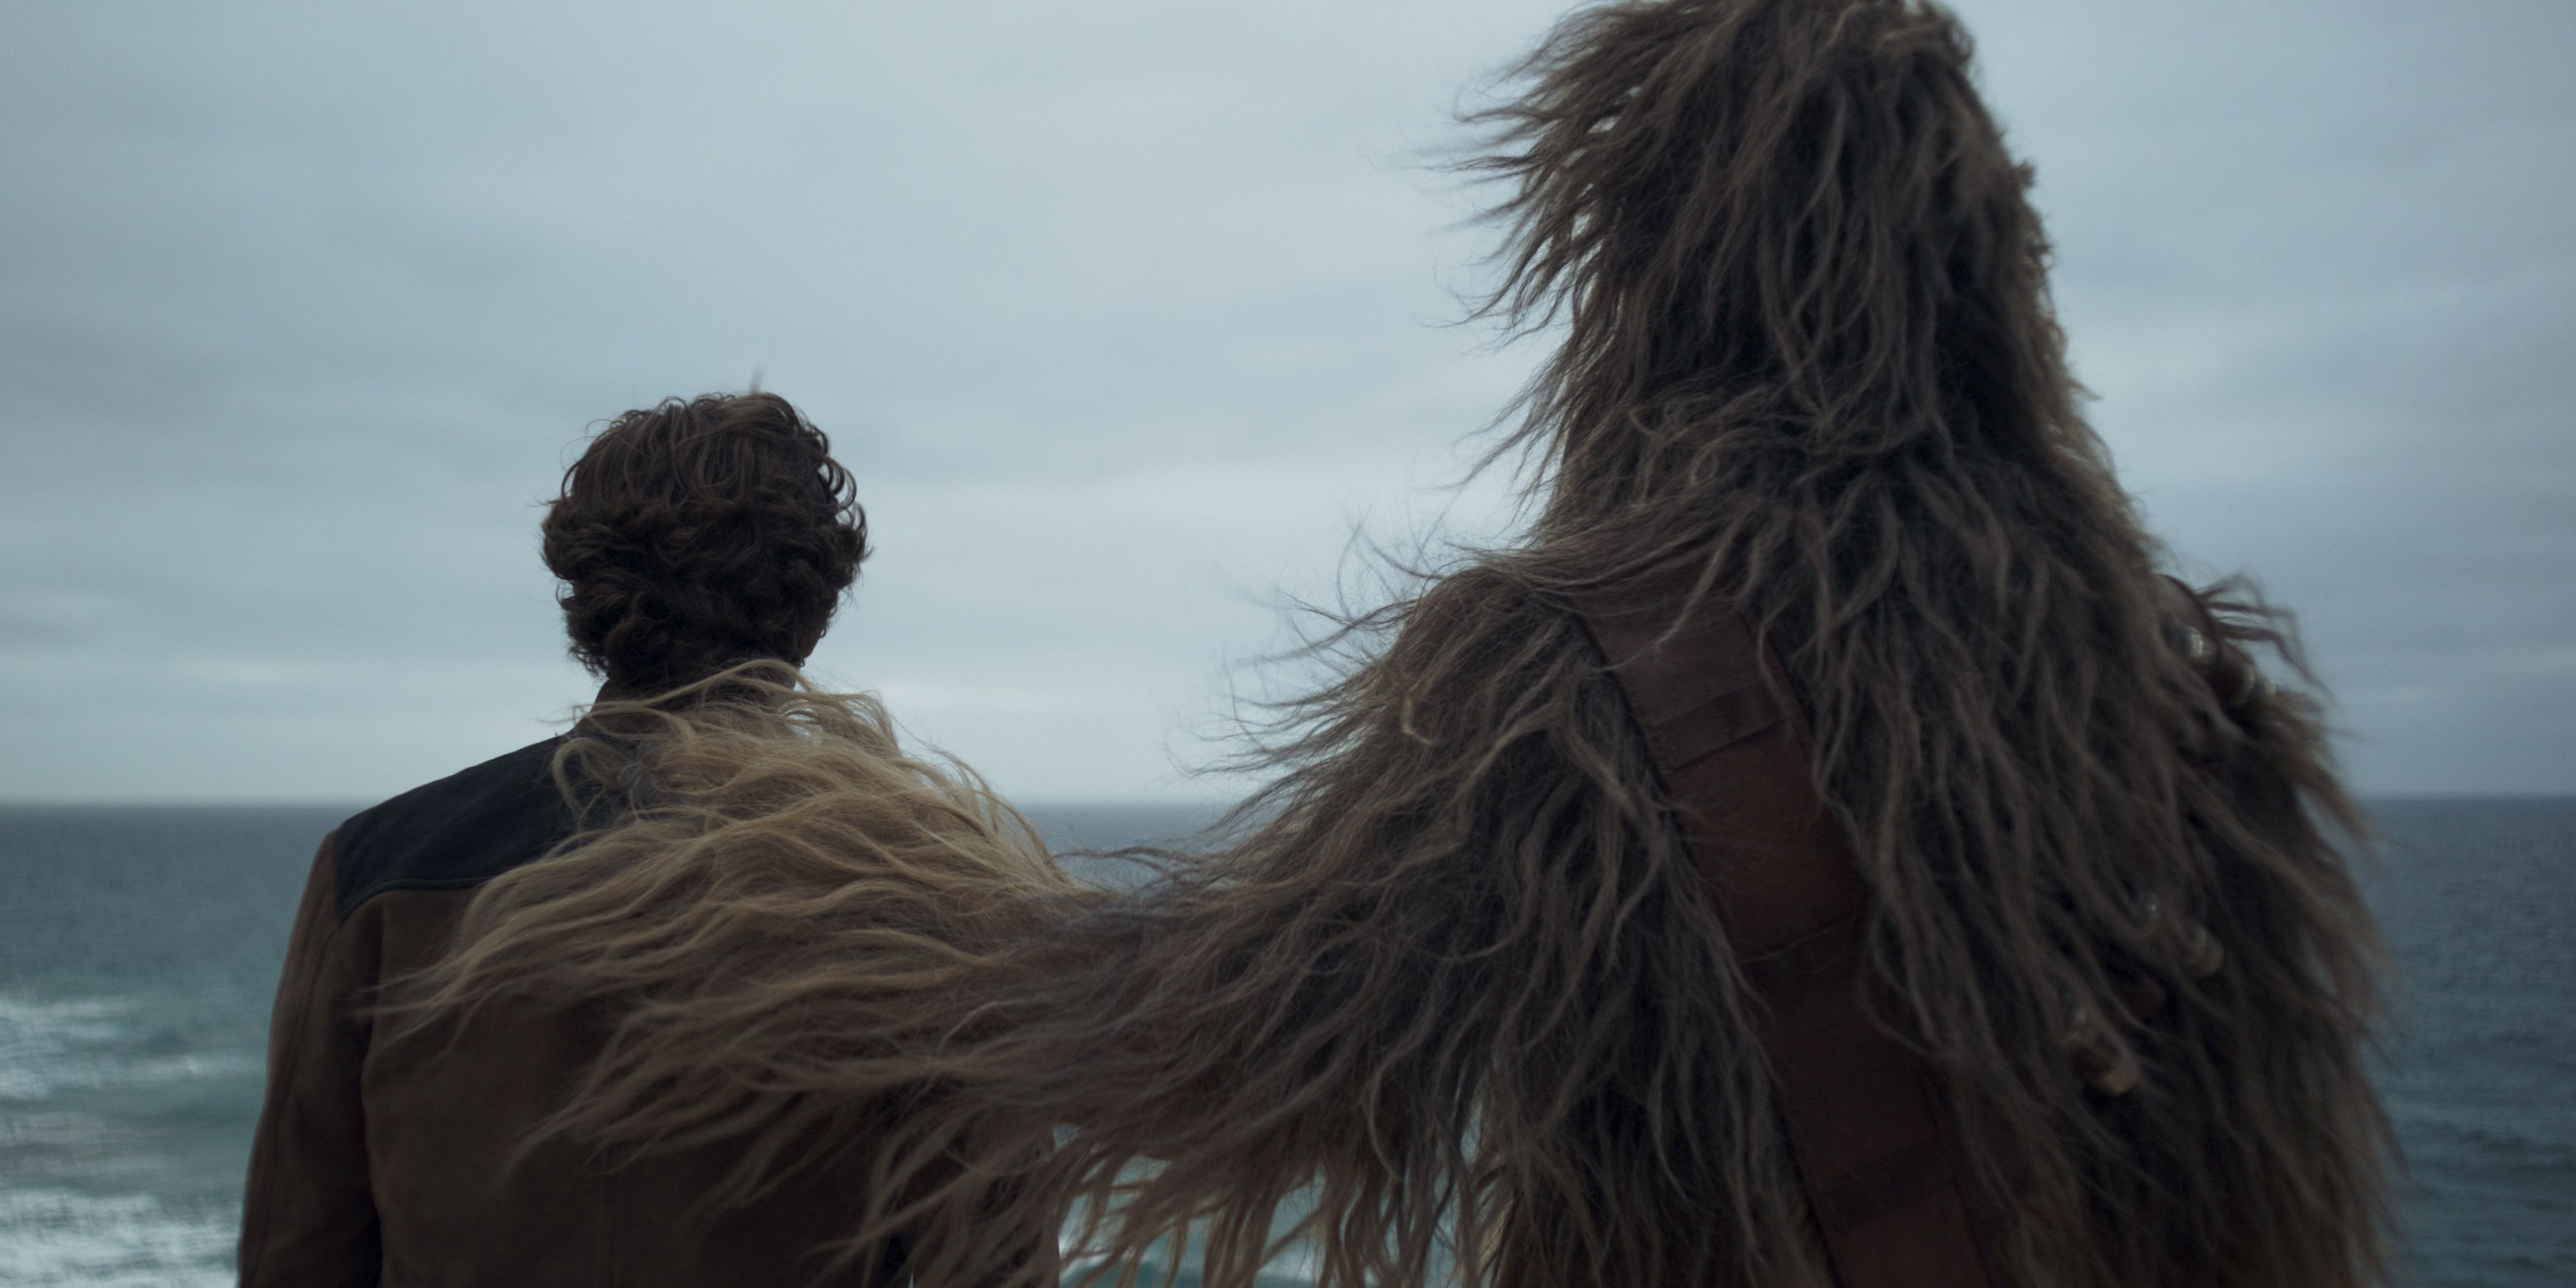 Han and Chewbacca in Solo A Star Wars Story